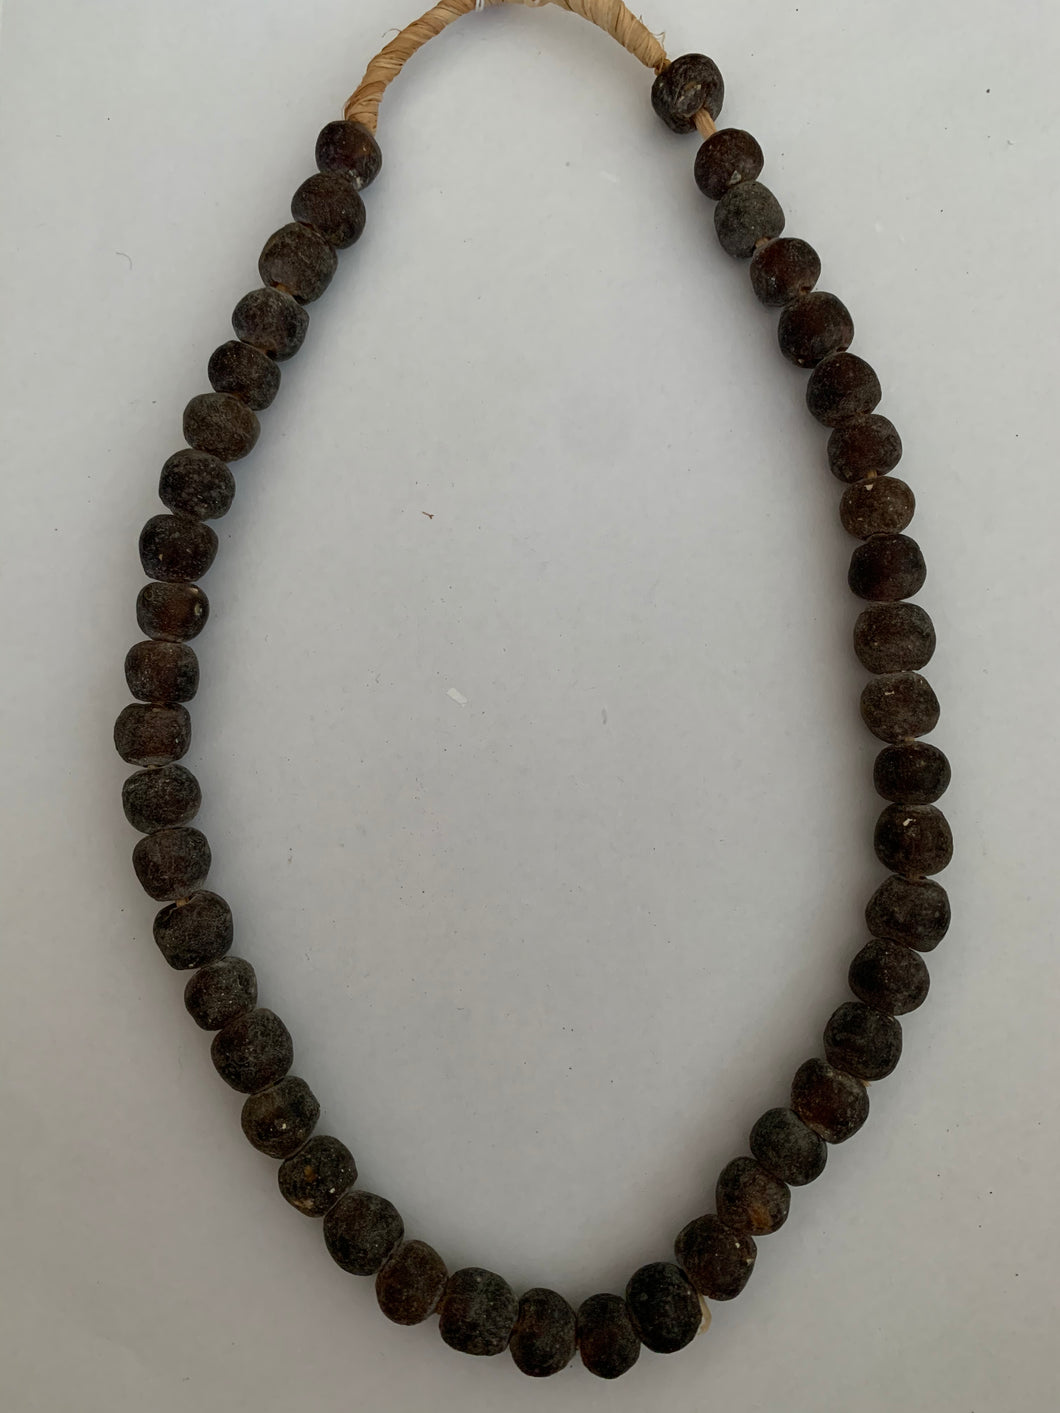 Vintage African Trade Bead Necklace